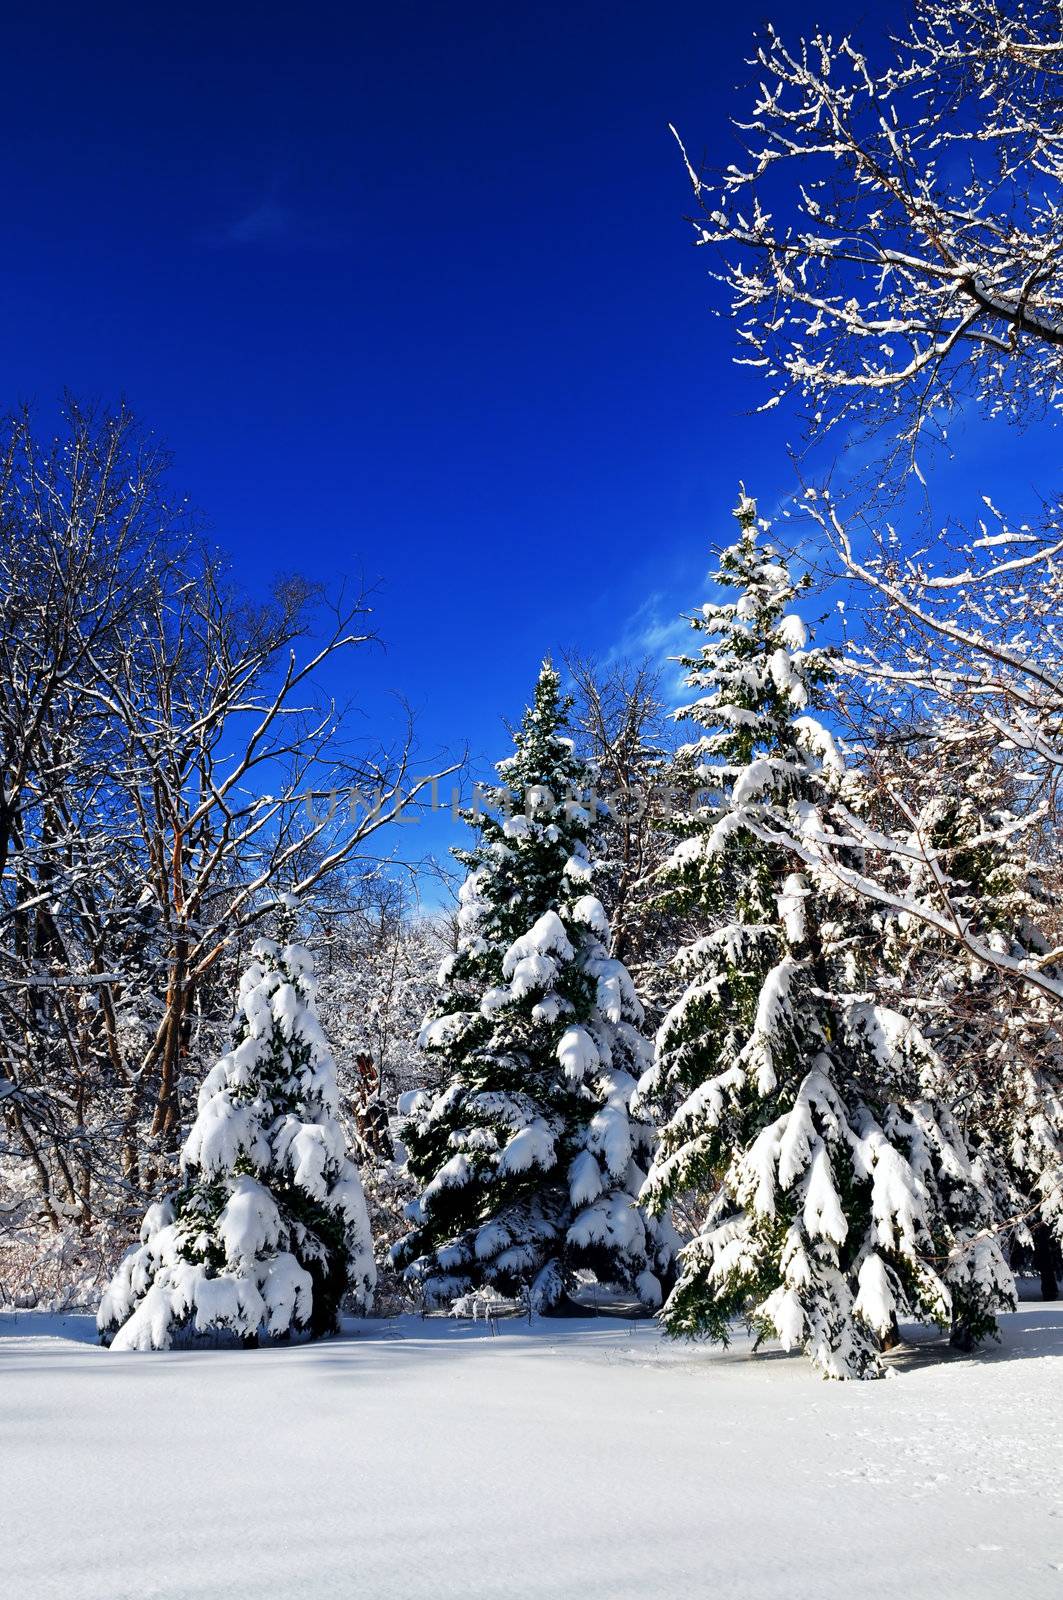 Winter landscape of a sunny forest after a heavy snowfall